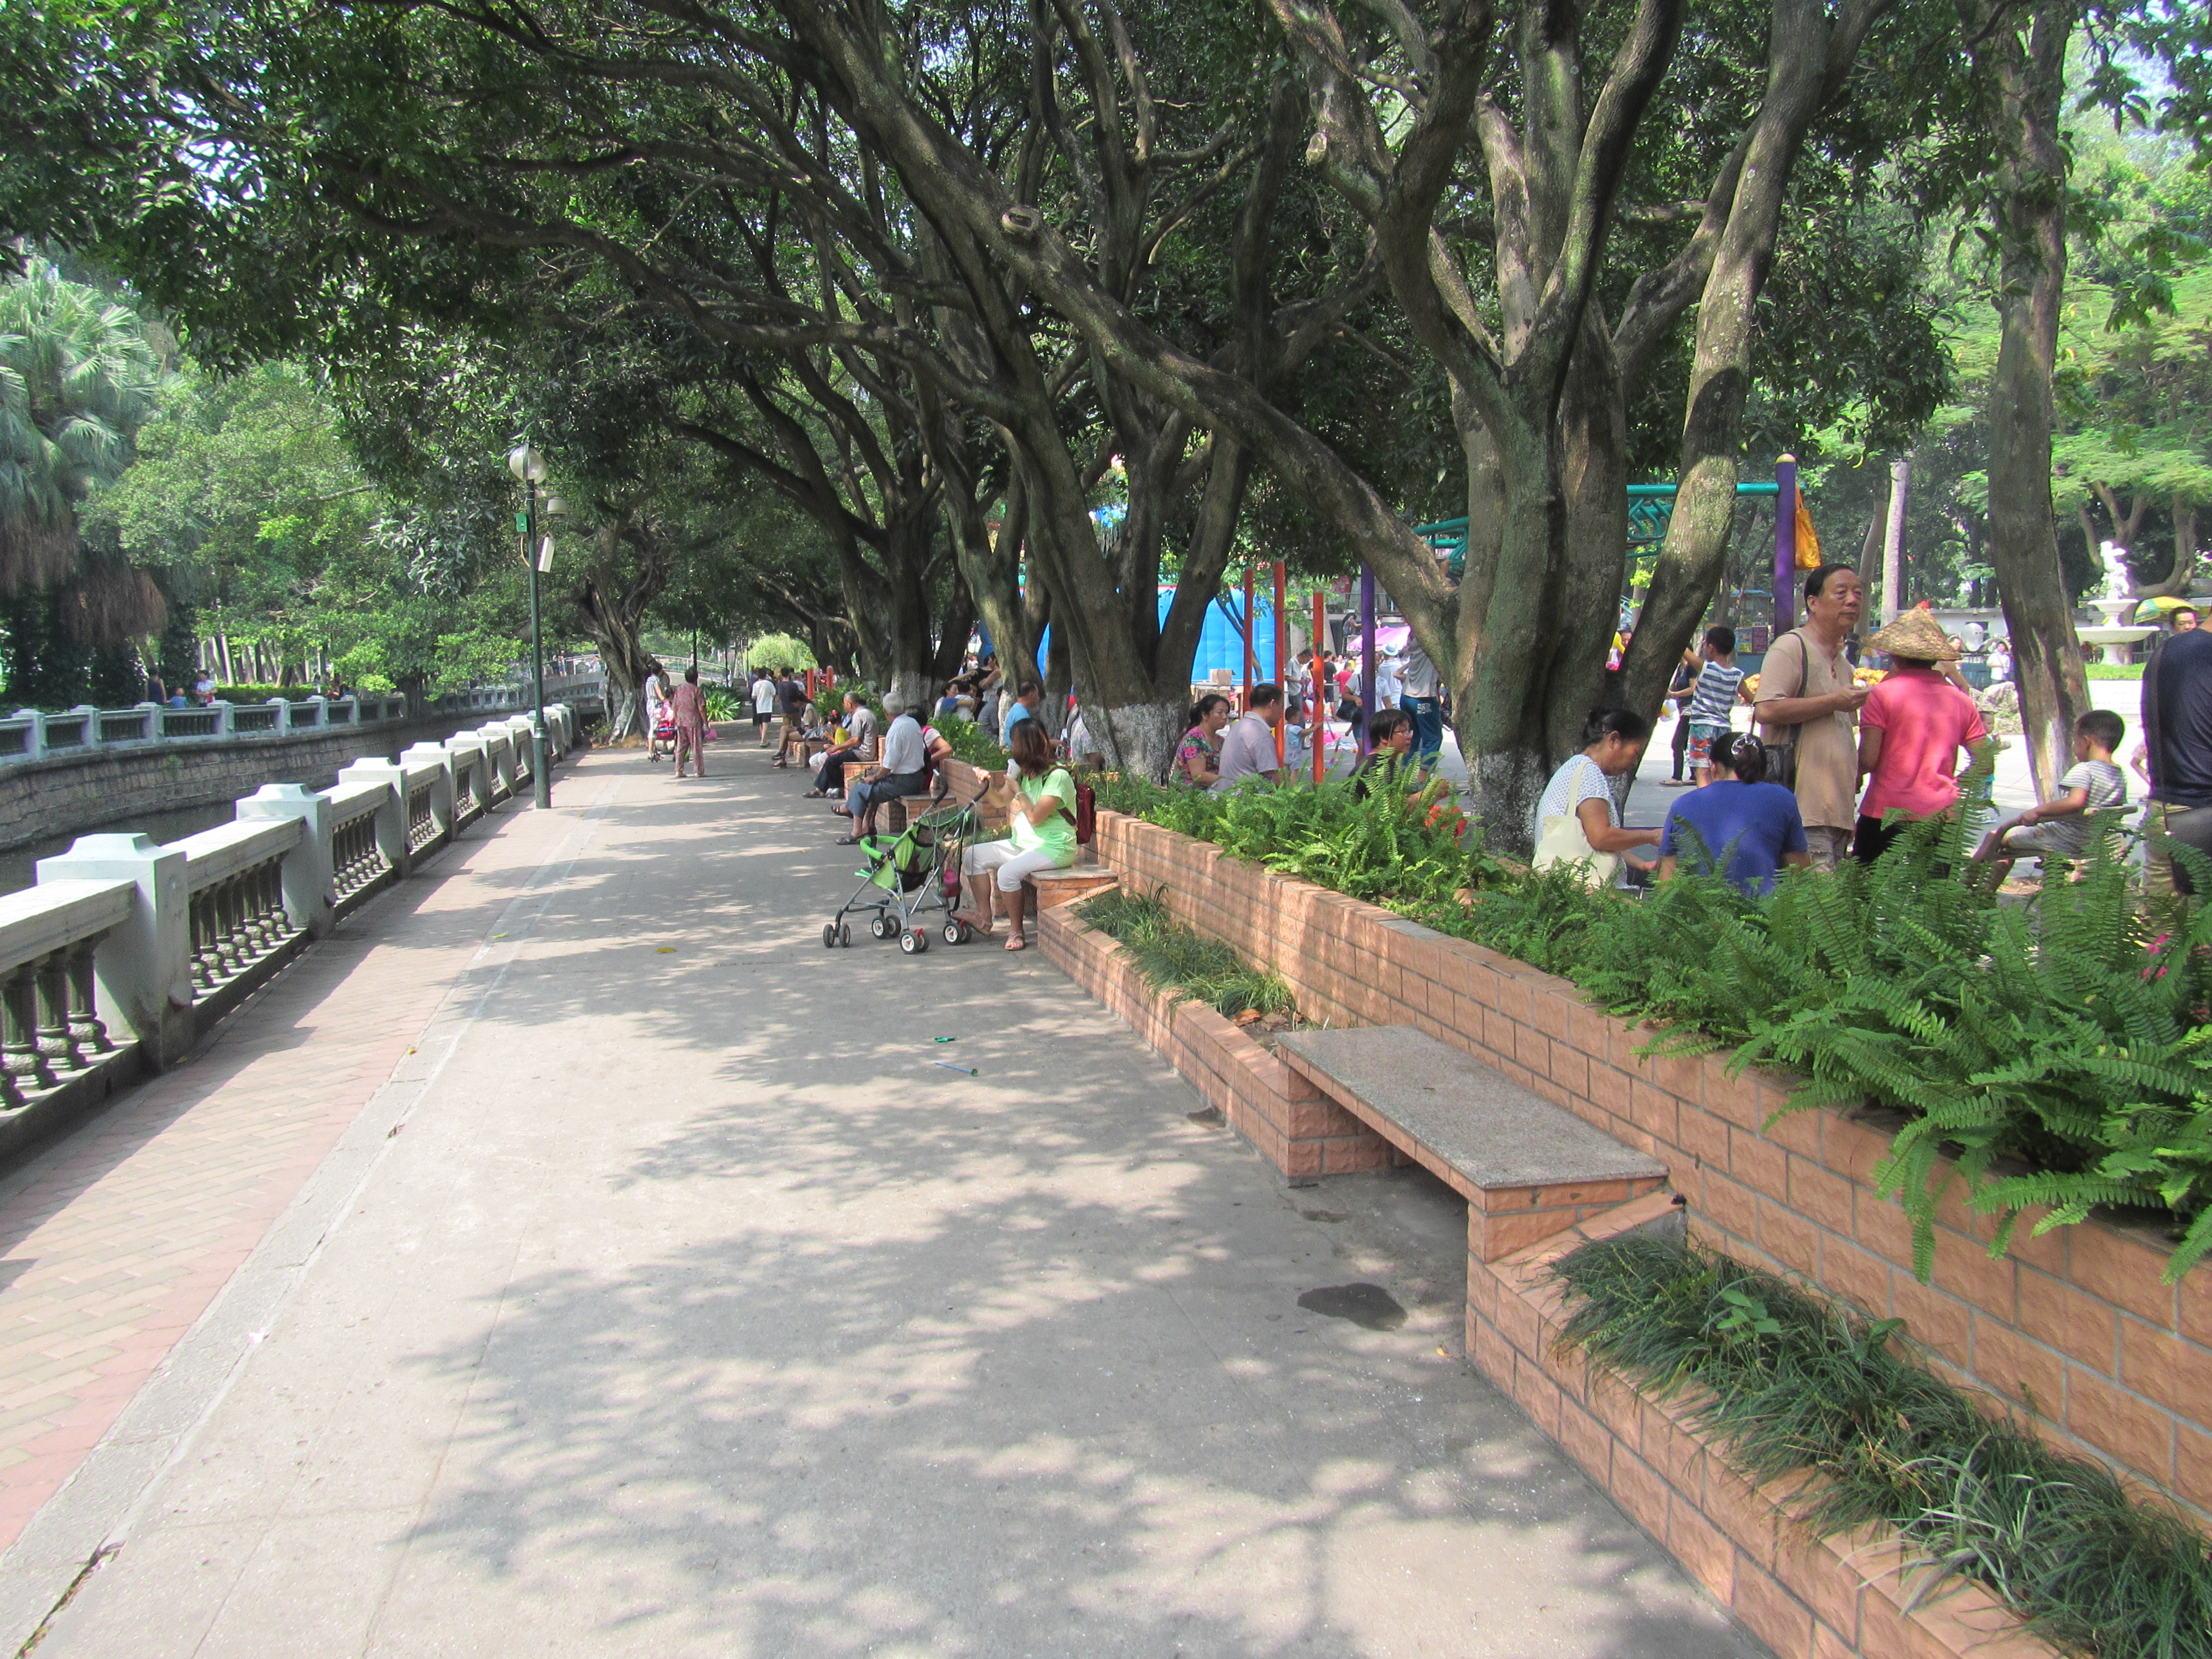 Another beautiful path.  There are plenty of benches, where you can enjoy the view, read a book or take a break from the crowds after a busy day of shopping on Zhong Shan Road